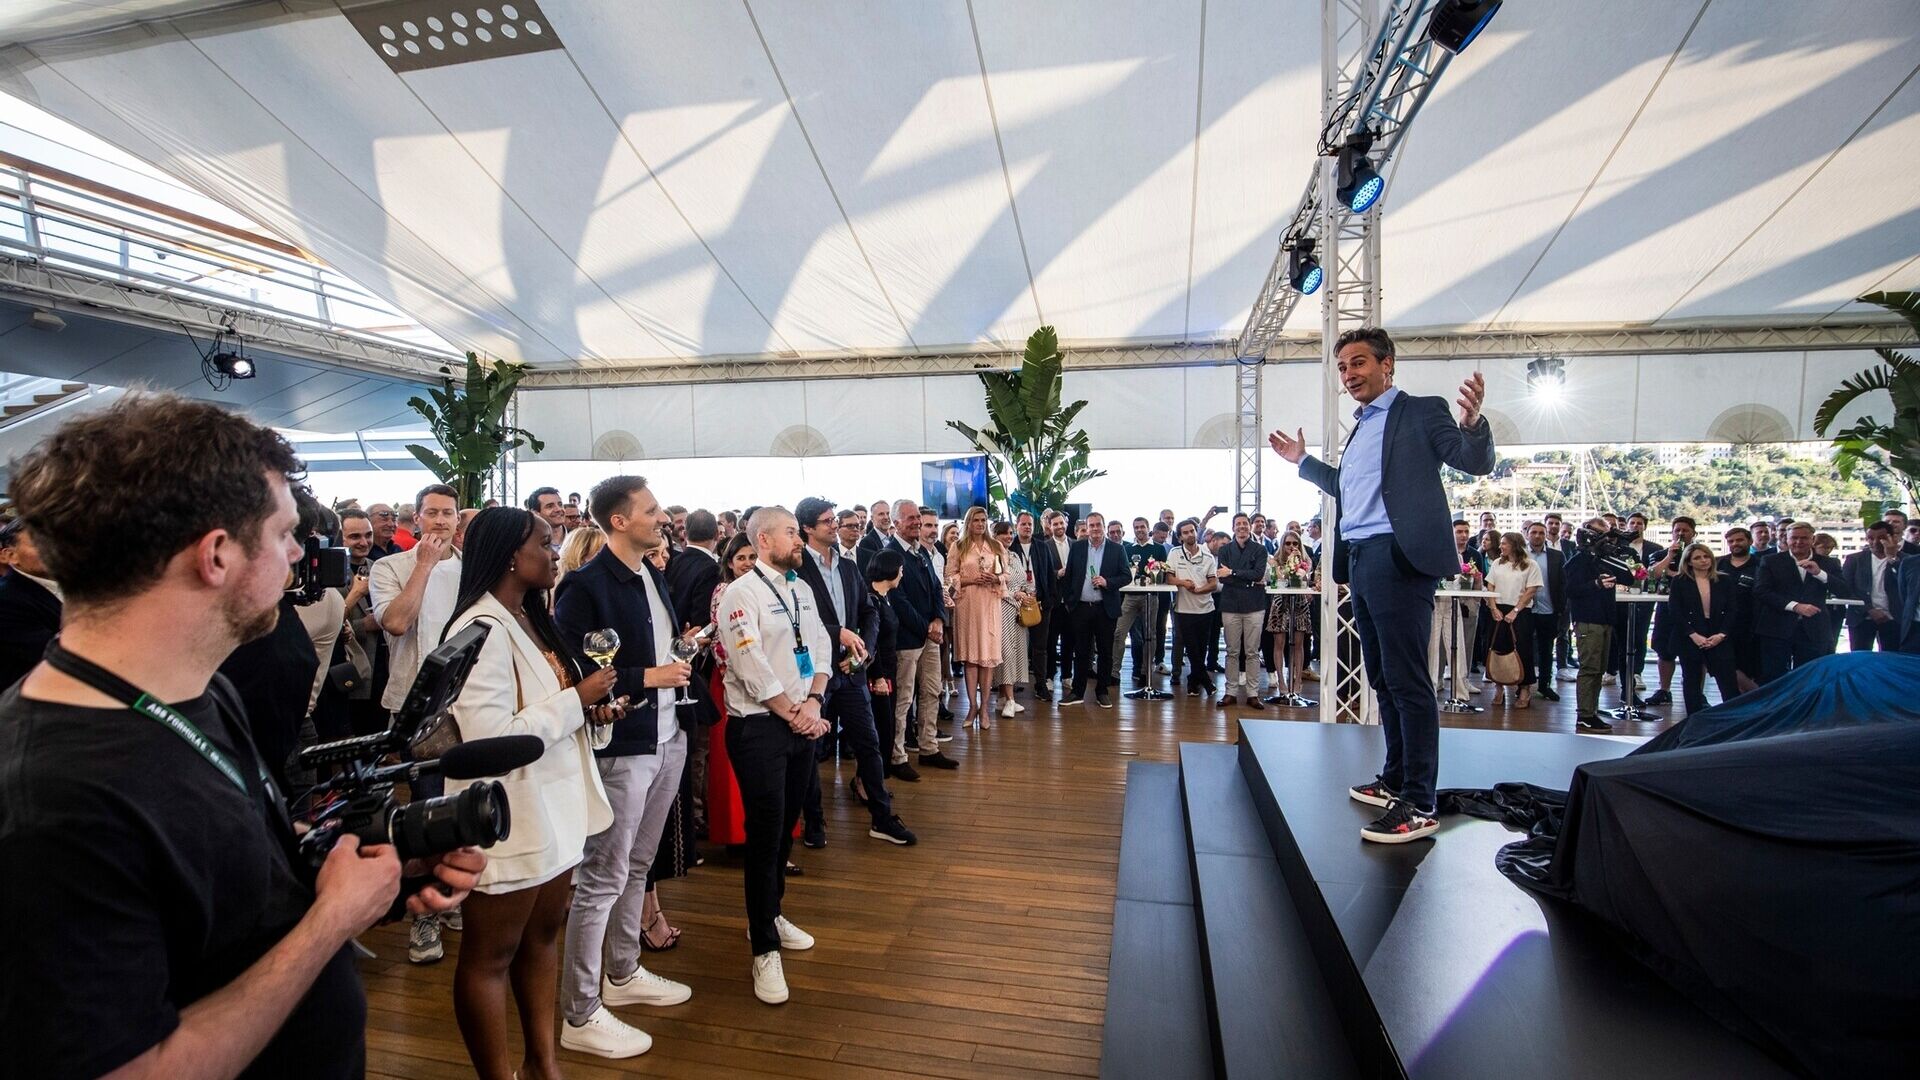 Gen3: the presentation of the Gen3 single-seater took place at the Yacht Club de Monaco in the presence of Mohammed Bin Sulayem, President of the FIA, and Jamie Reigle, CEO of Formula E